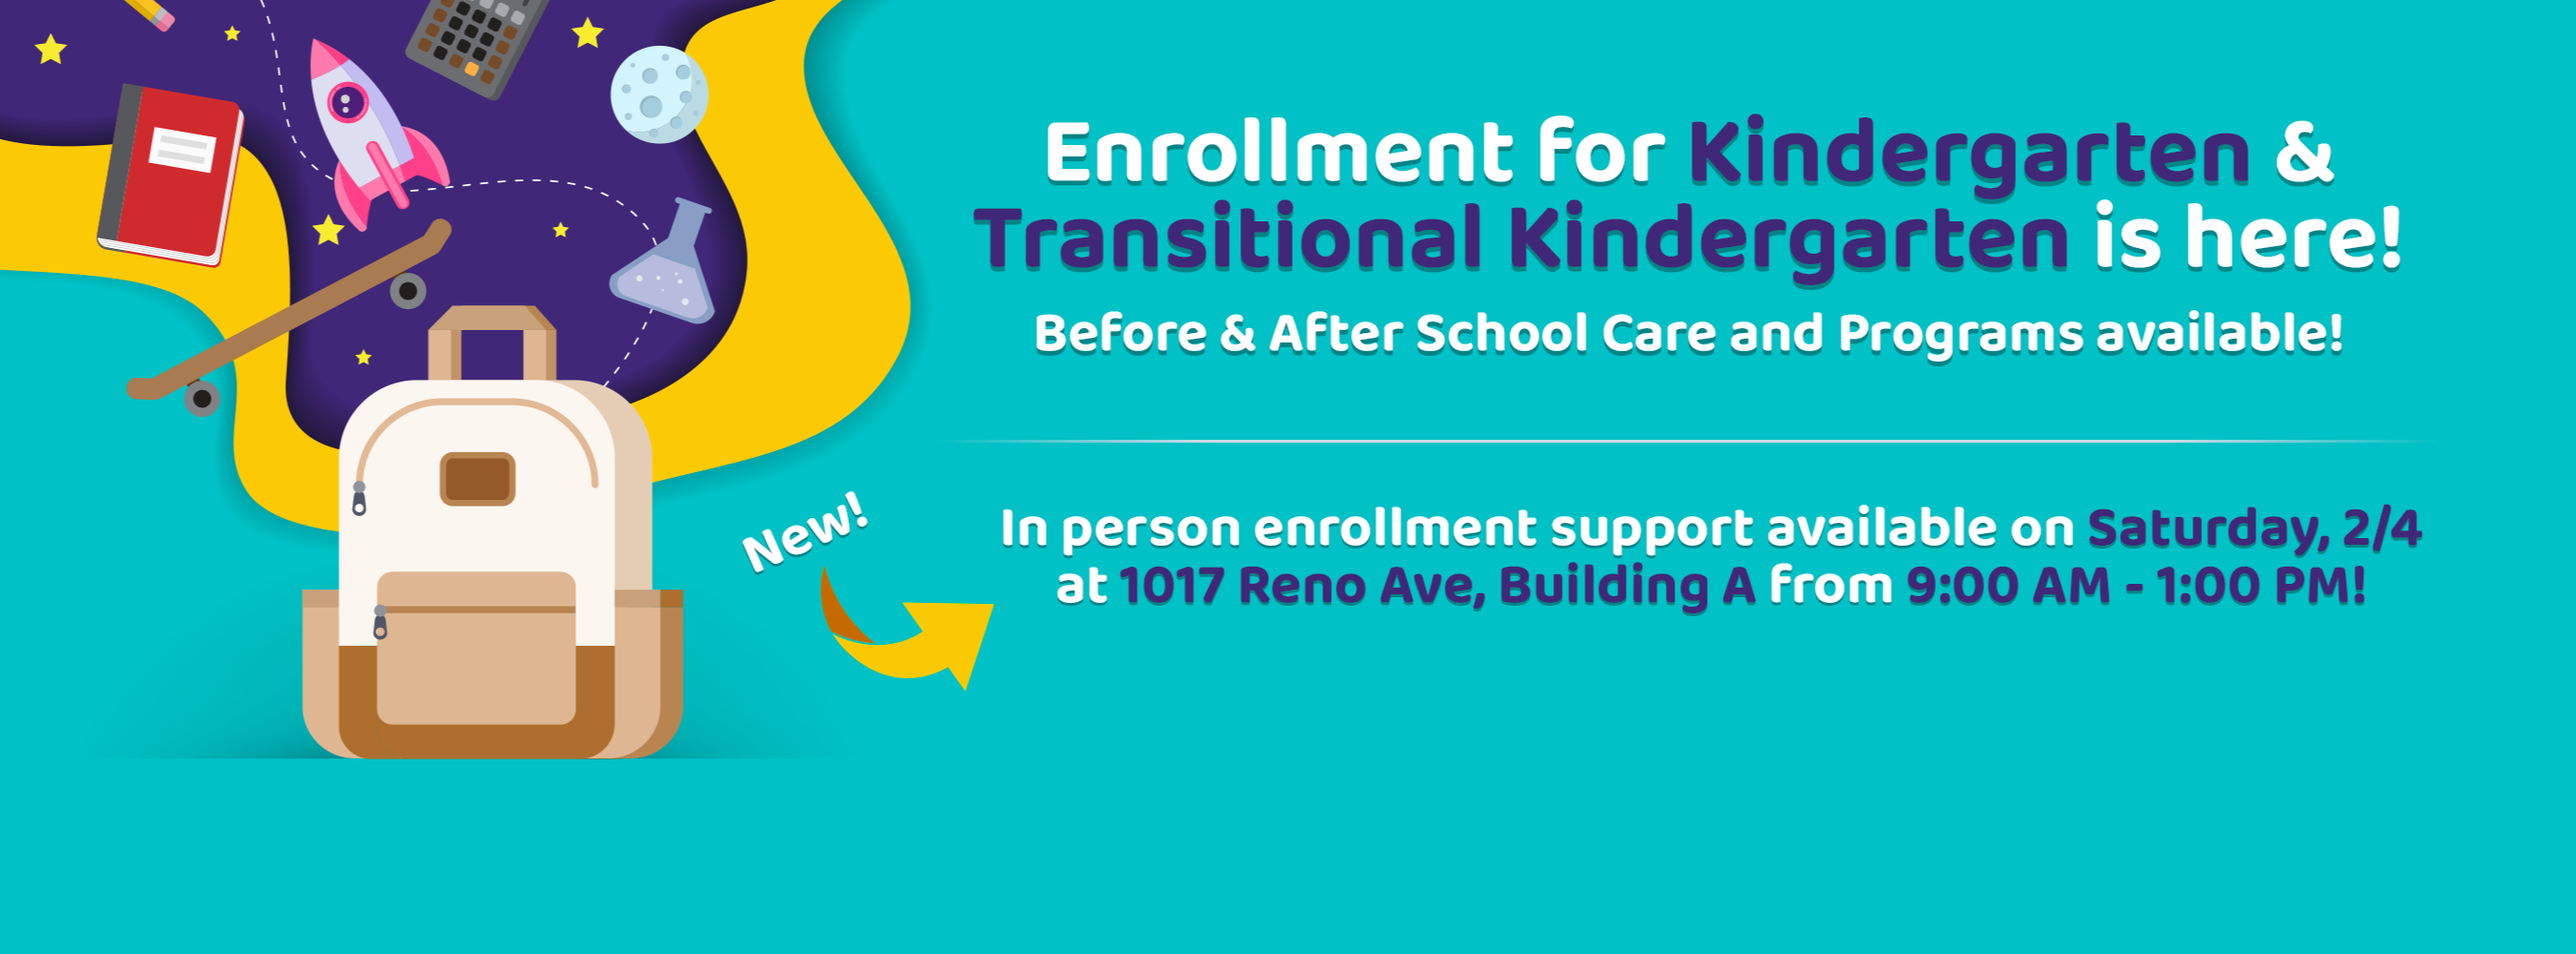 Home page banner advertising Kindergarten and Transitional Kindergarten enrollment for the 2023-2024 school year